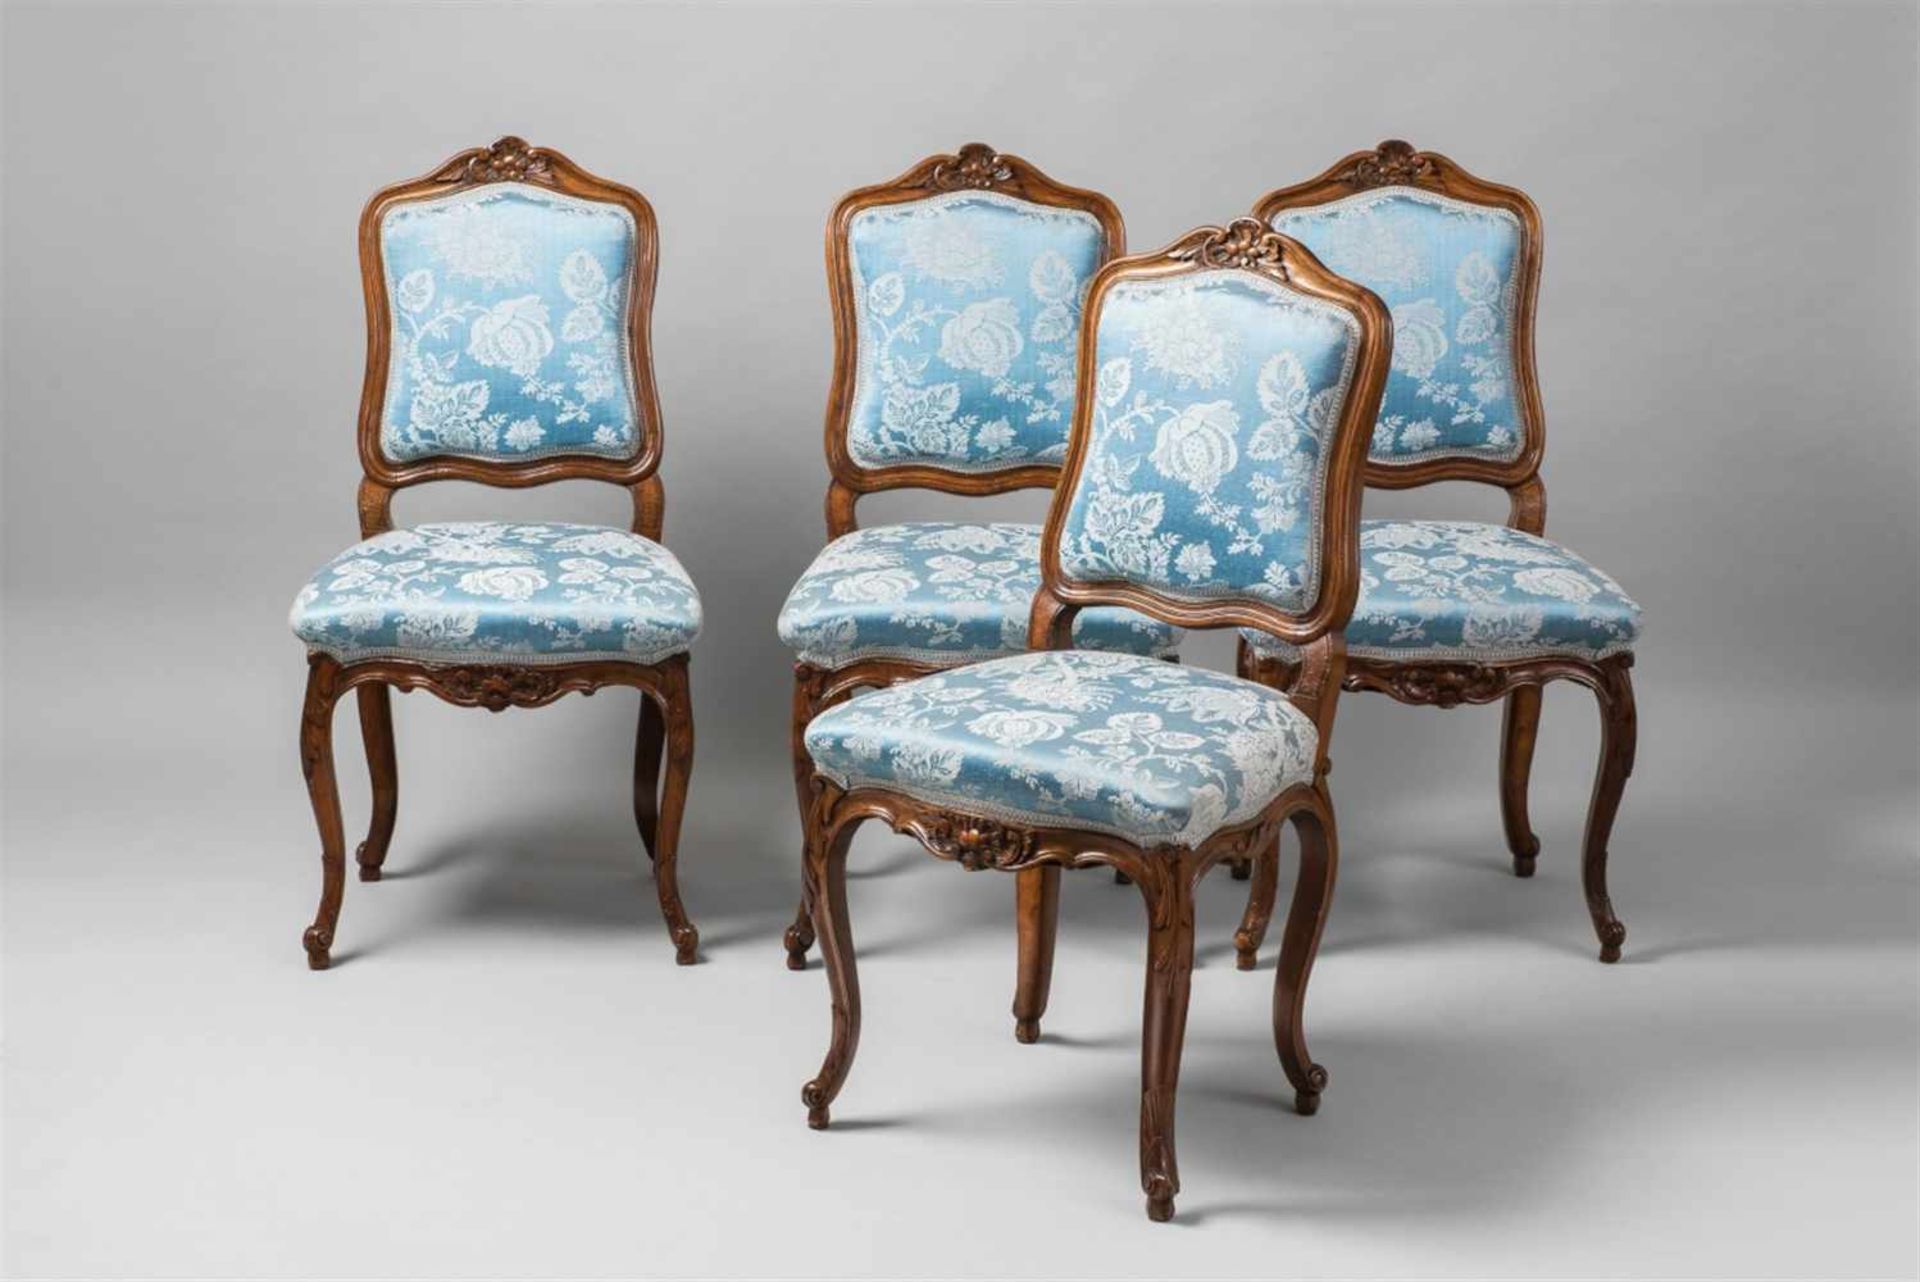 Four South German Rococo chairsCarved walnut with modern damask upholstery. Restored. H 95, seat